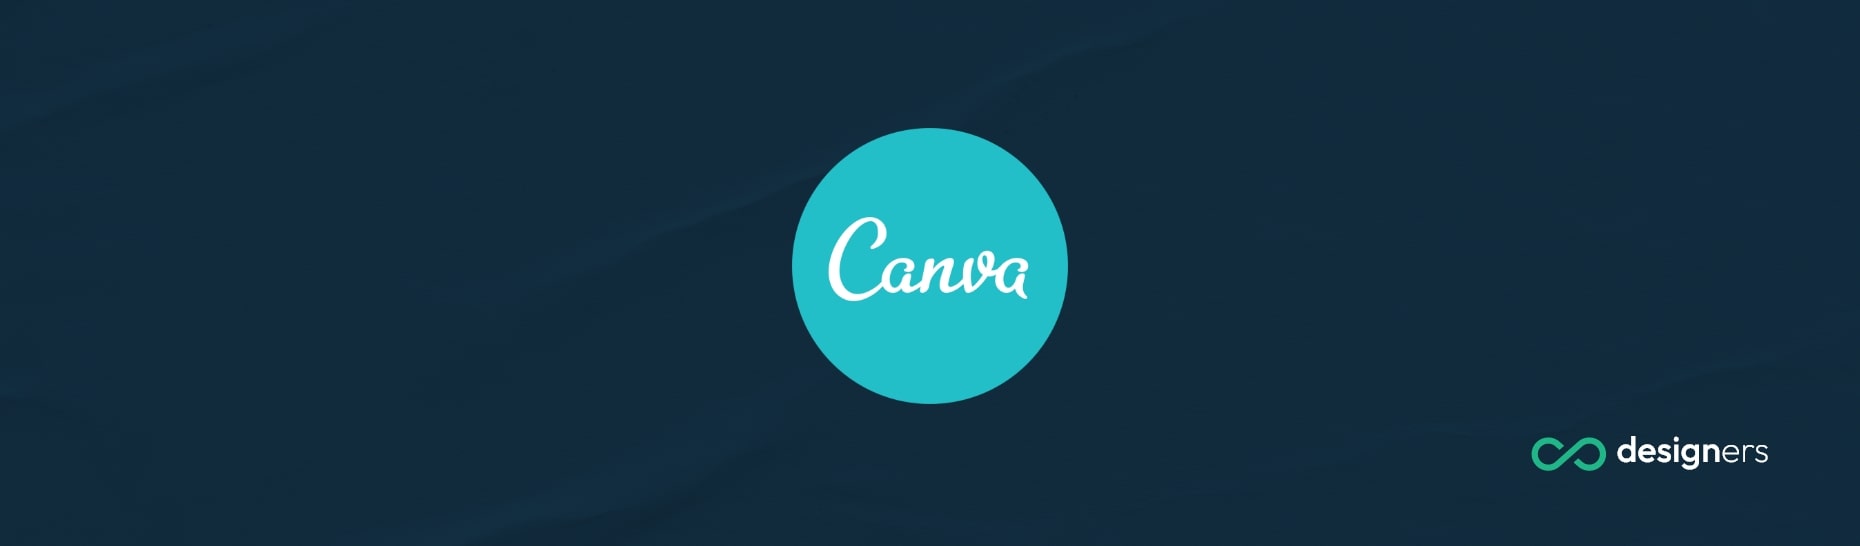 Does Canva Print Tickets?